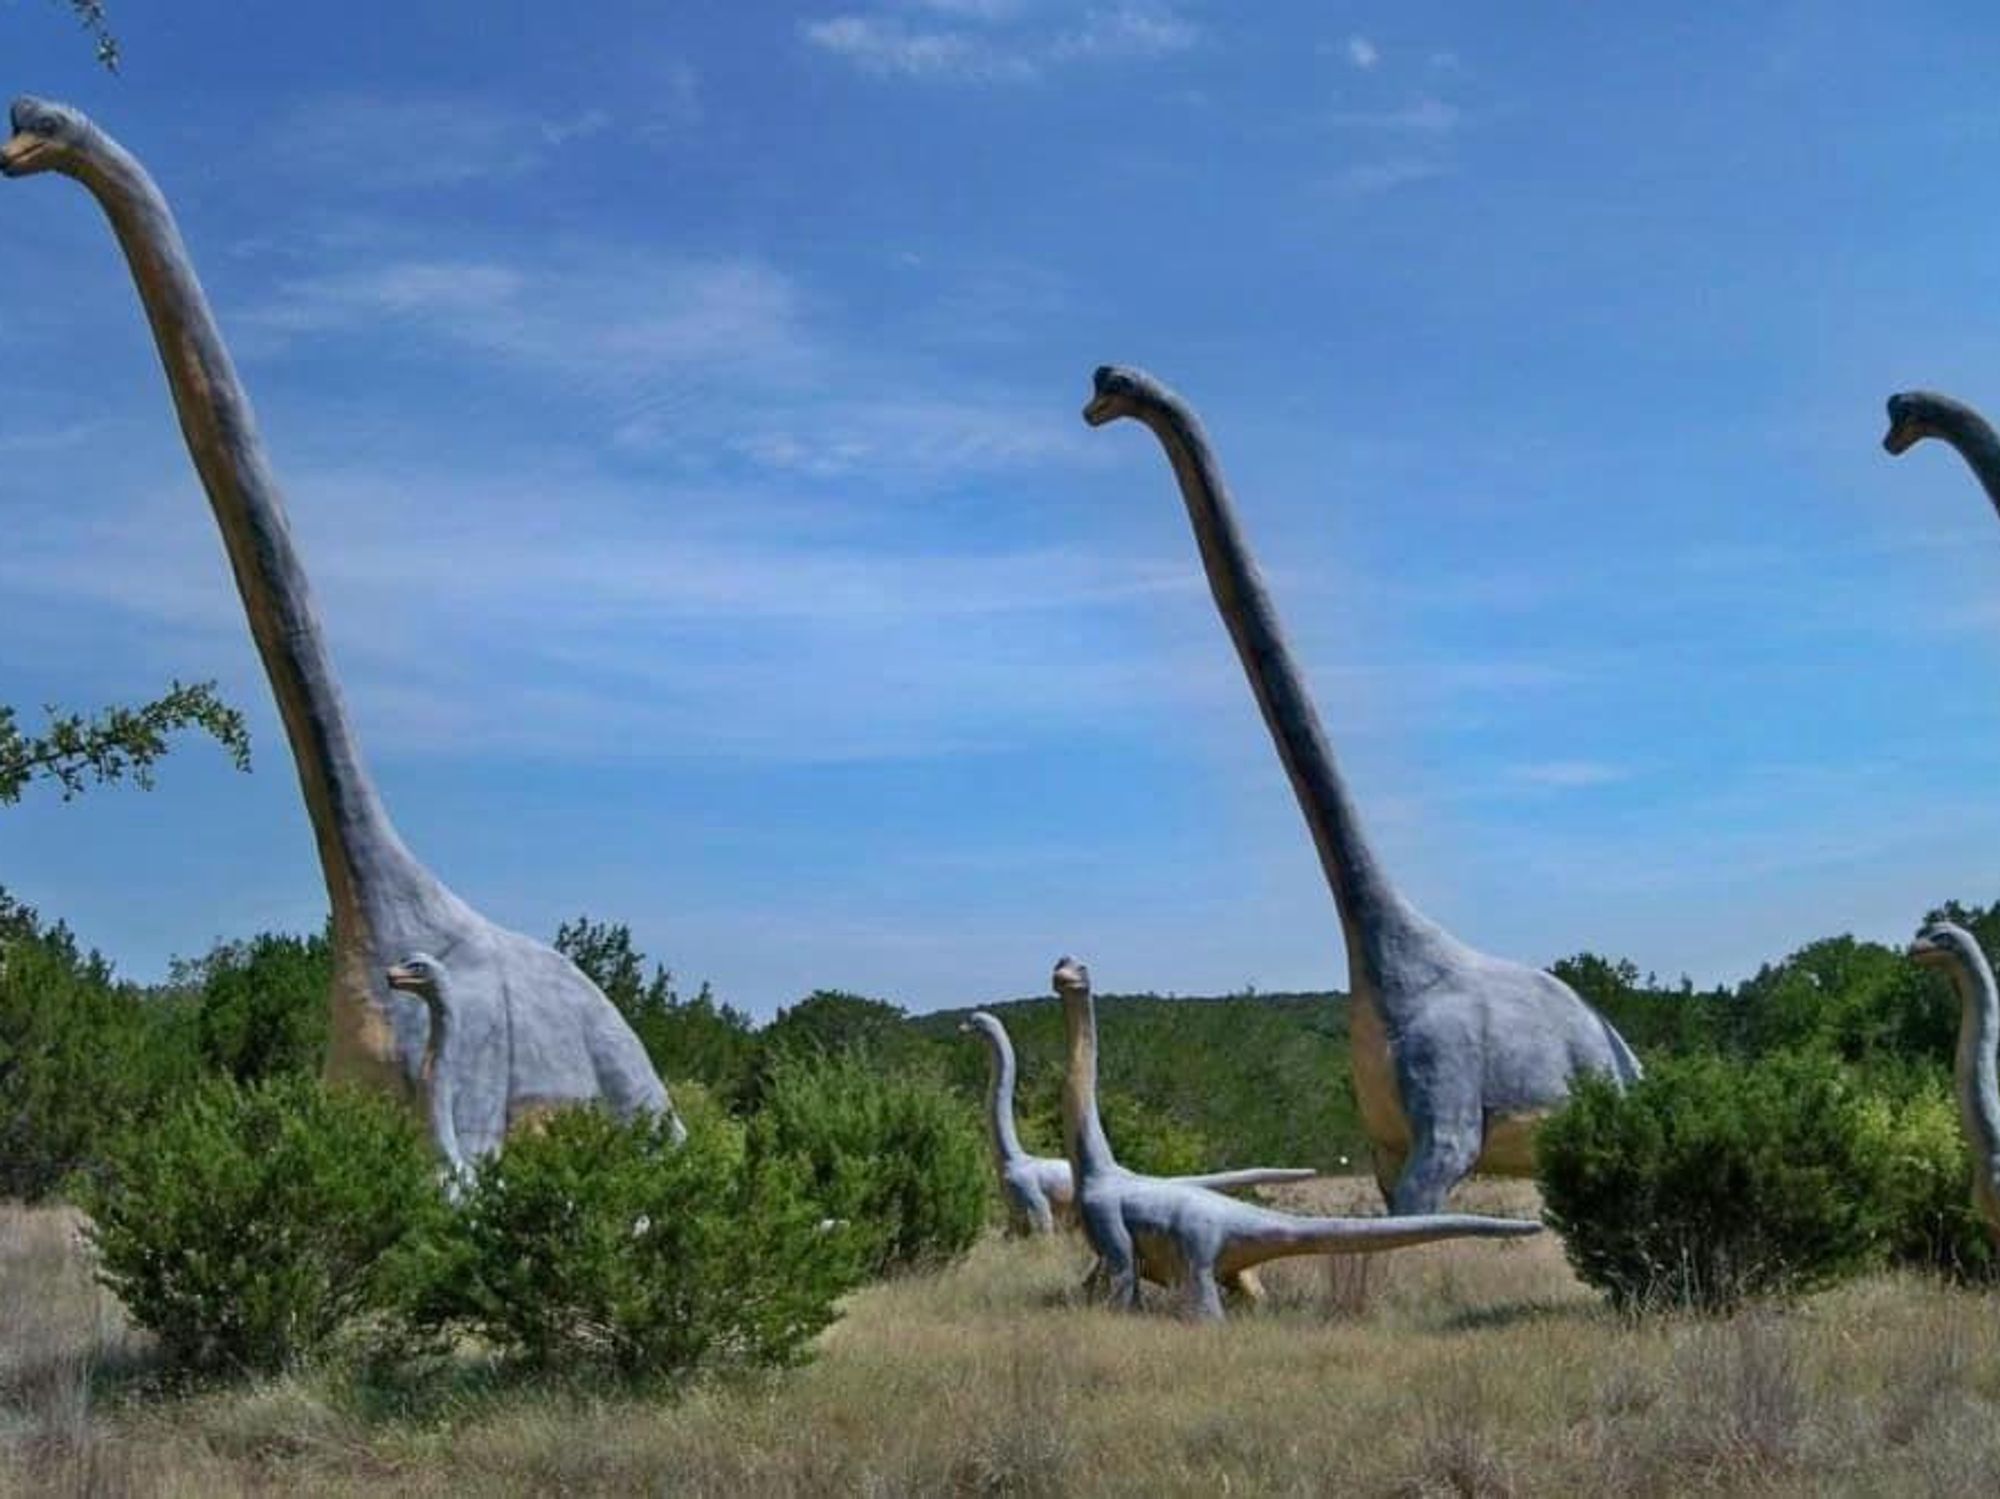 It's a prehistoric playground at Dinosaur World Texas with hundreds of life-sized dinos.